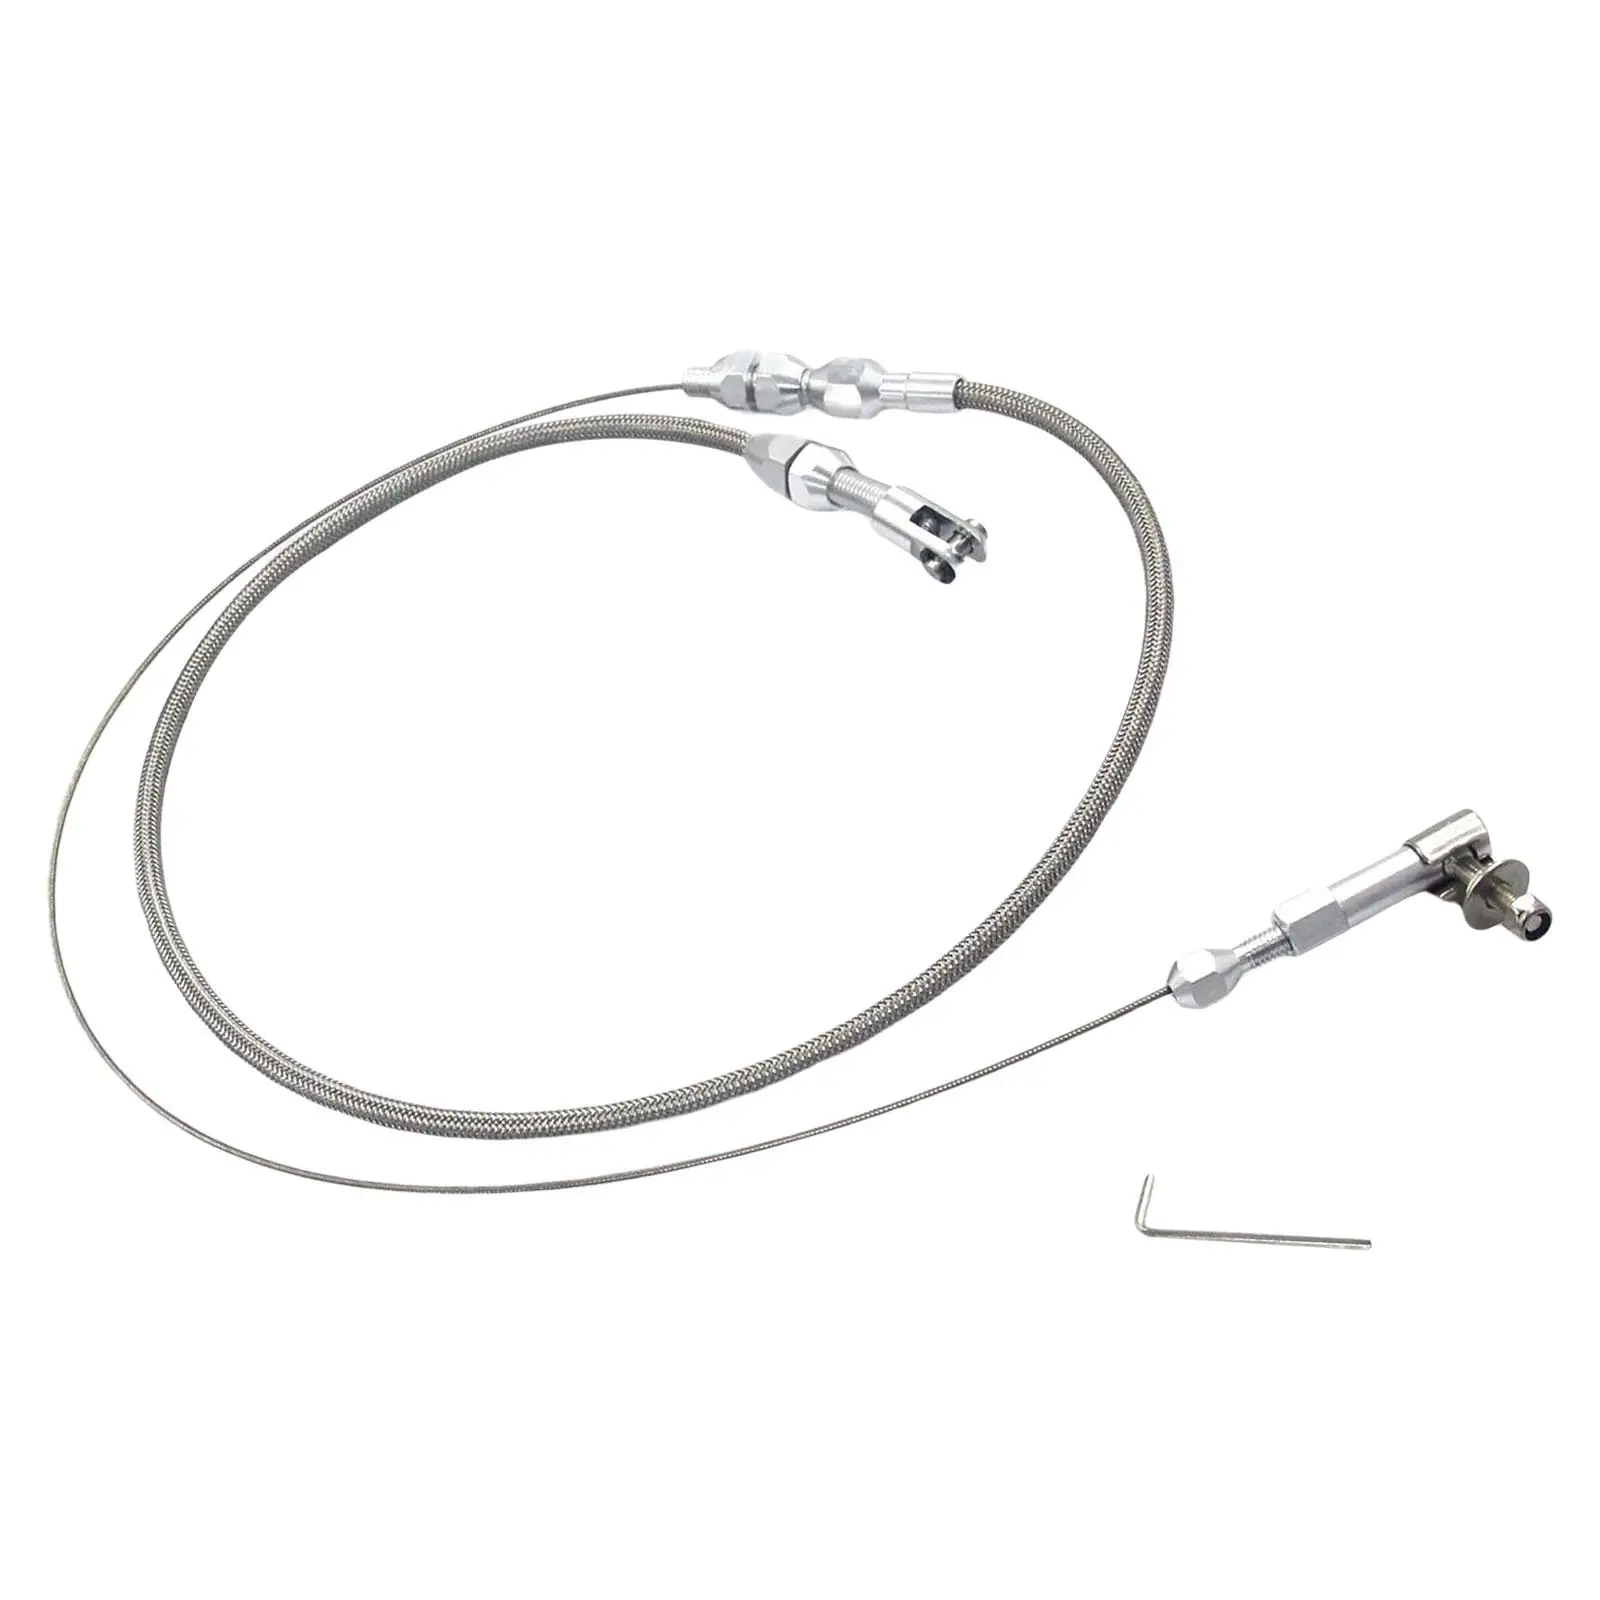 Swap Fuel Line 91cm Braided Throttle Cable for Replacement Accessories